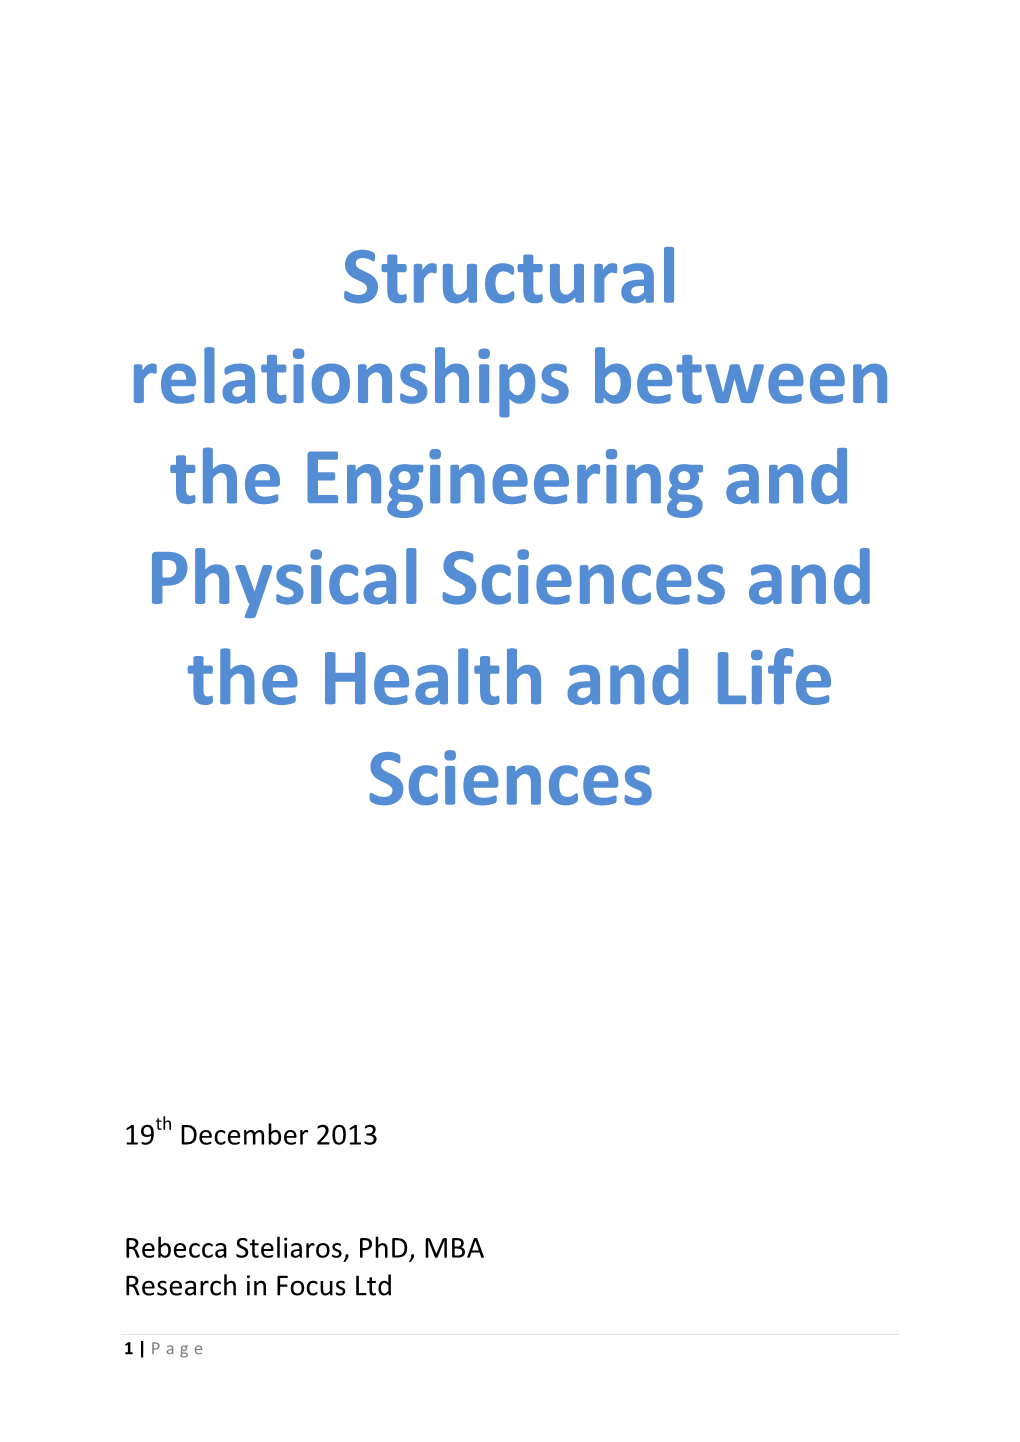 Structural Relationships Between the Engineering and Physical Sciences and the Health and Life Sciences